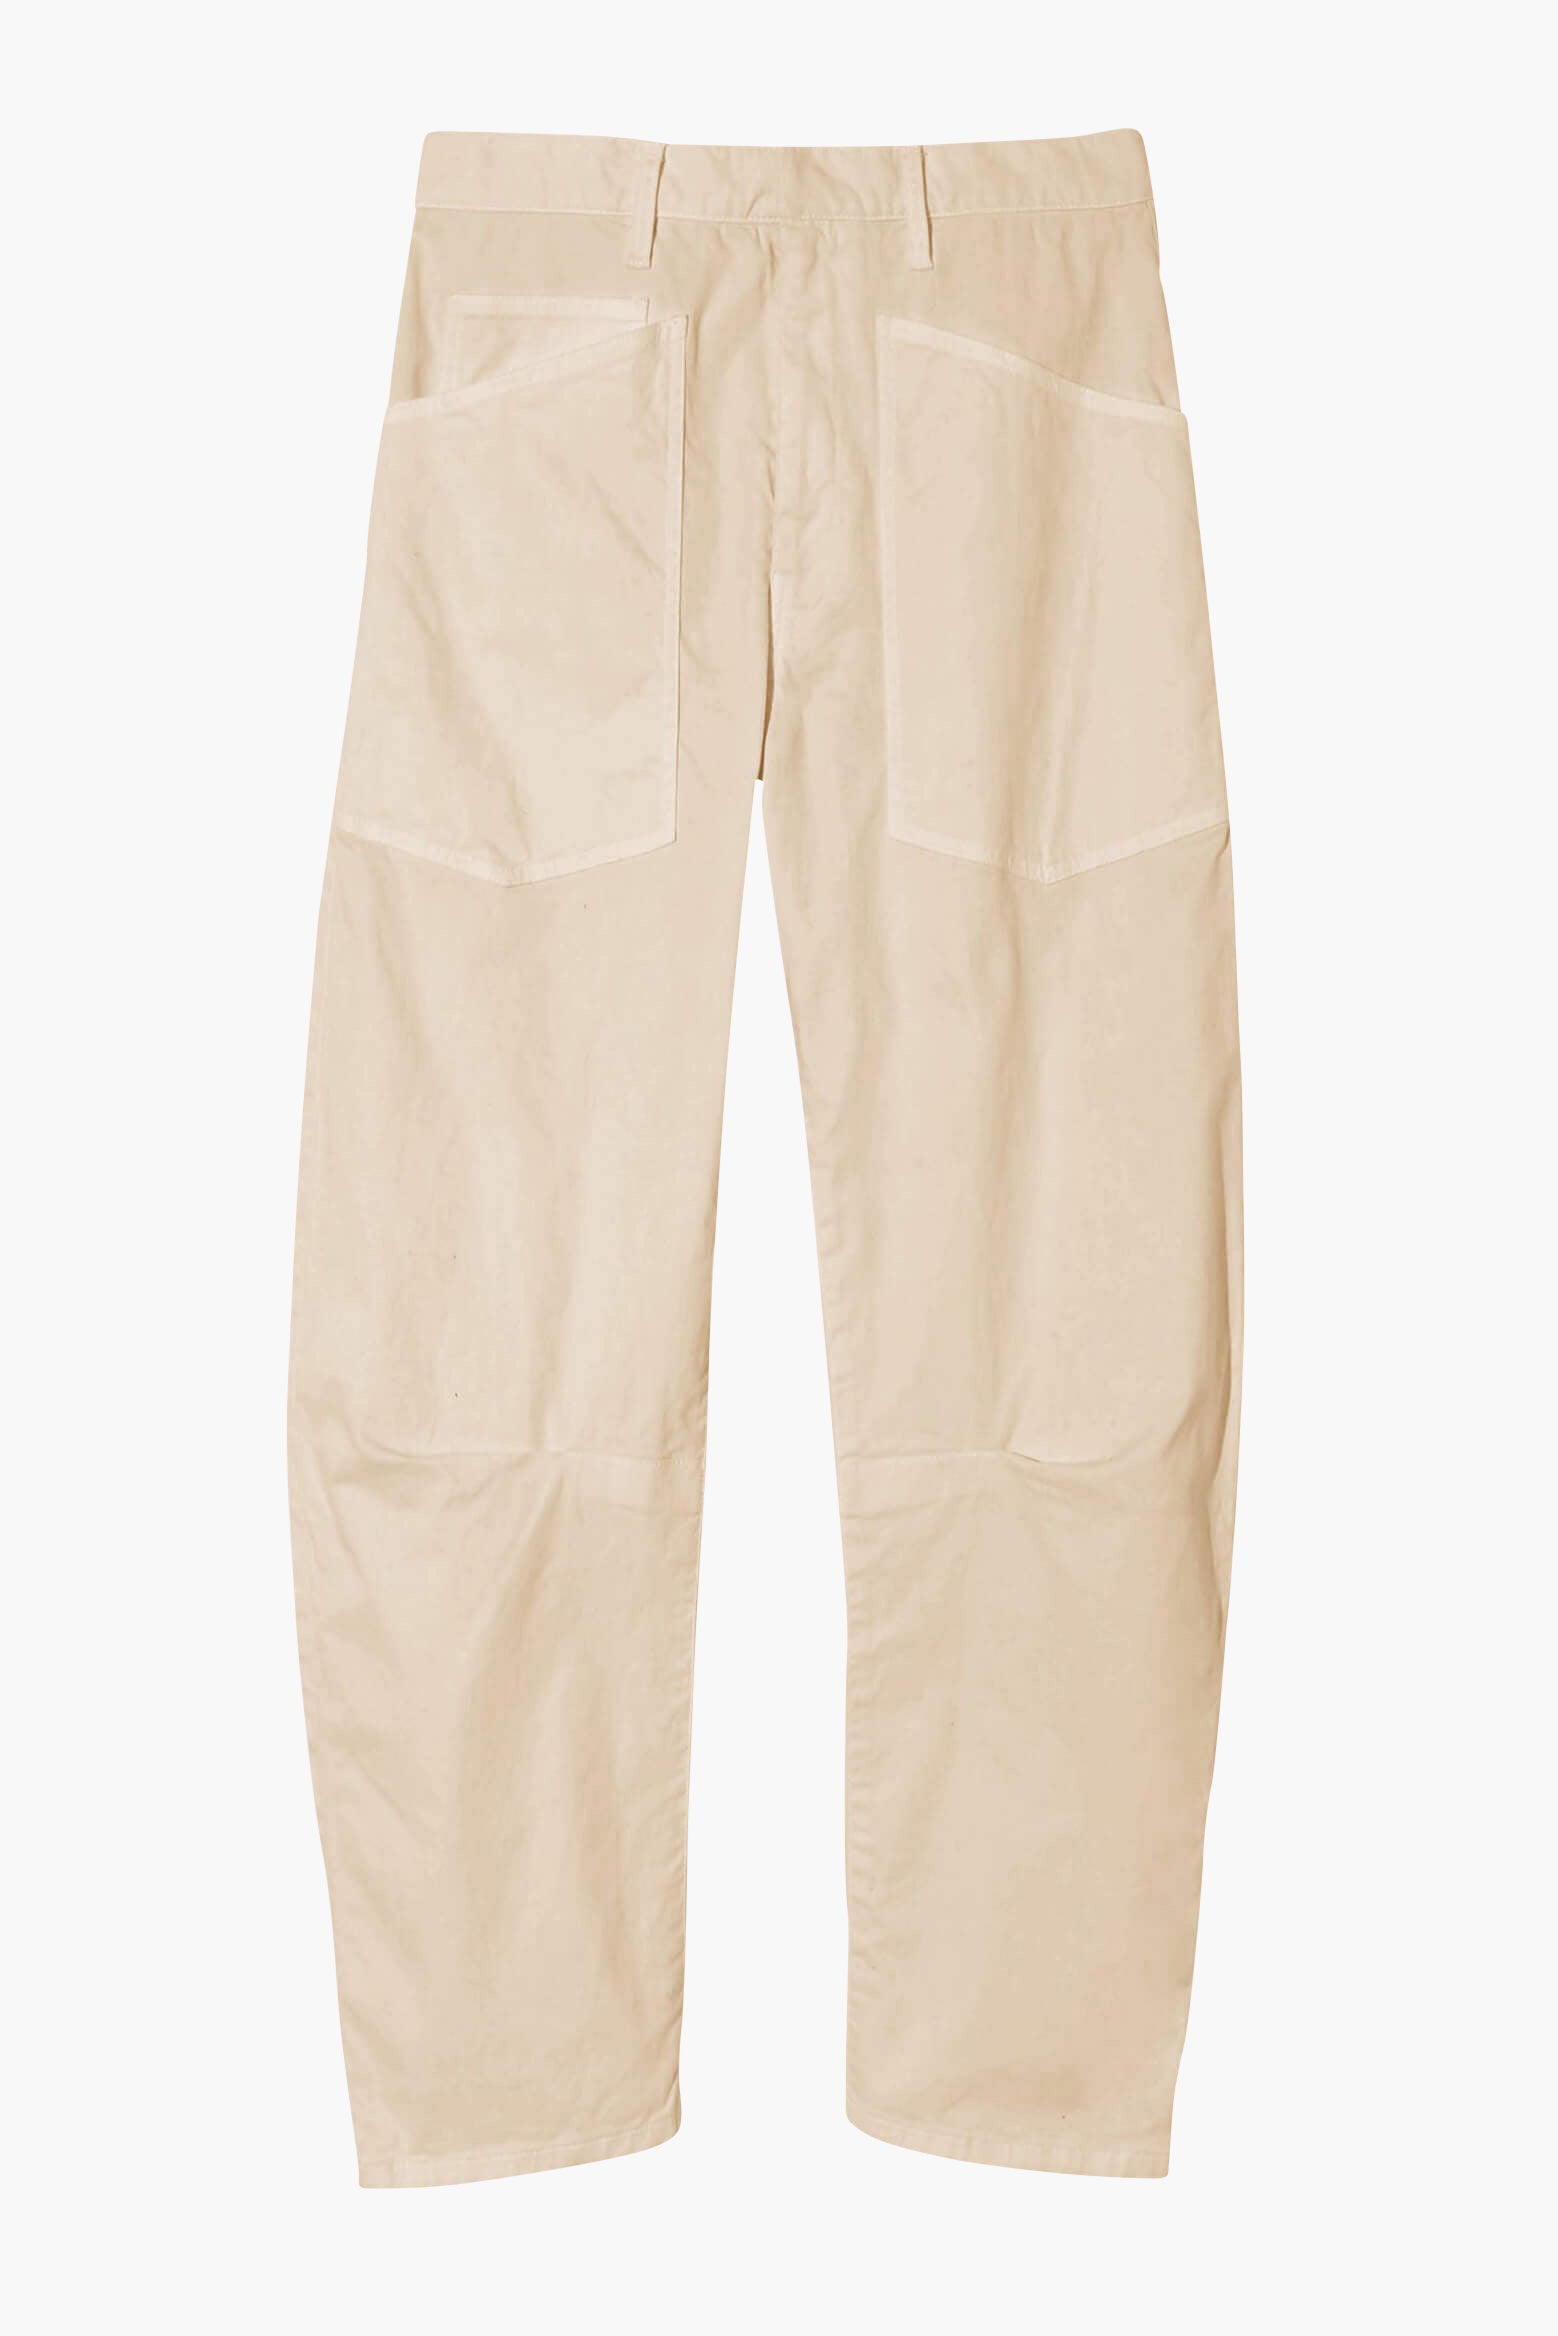 Nili Lotan Shon Pant in Sandstone available at The New Trend